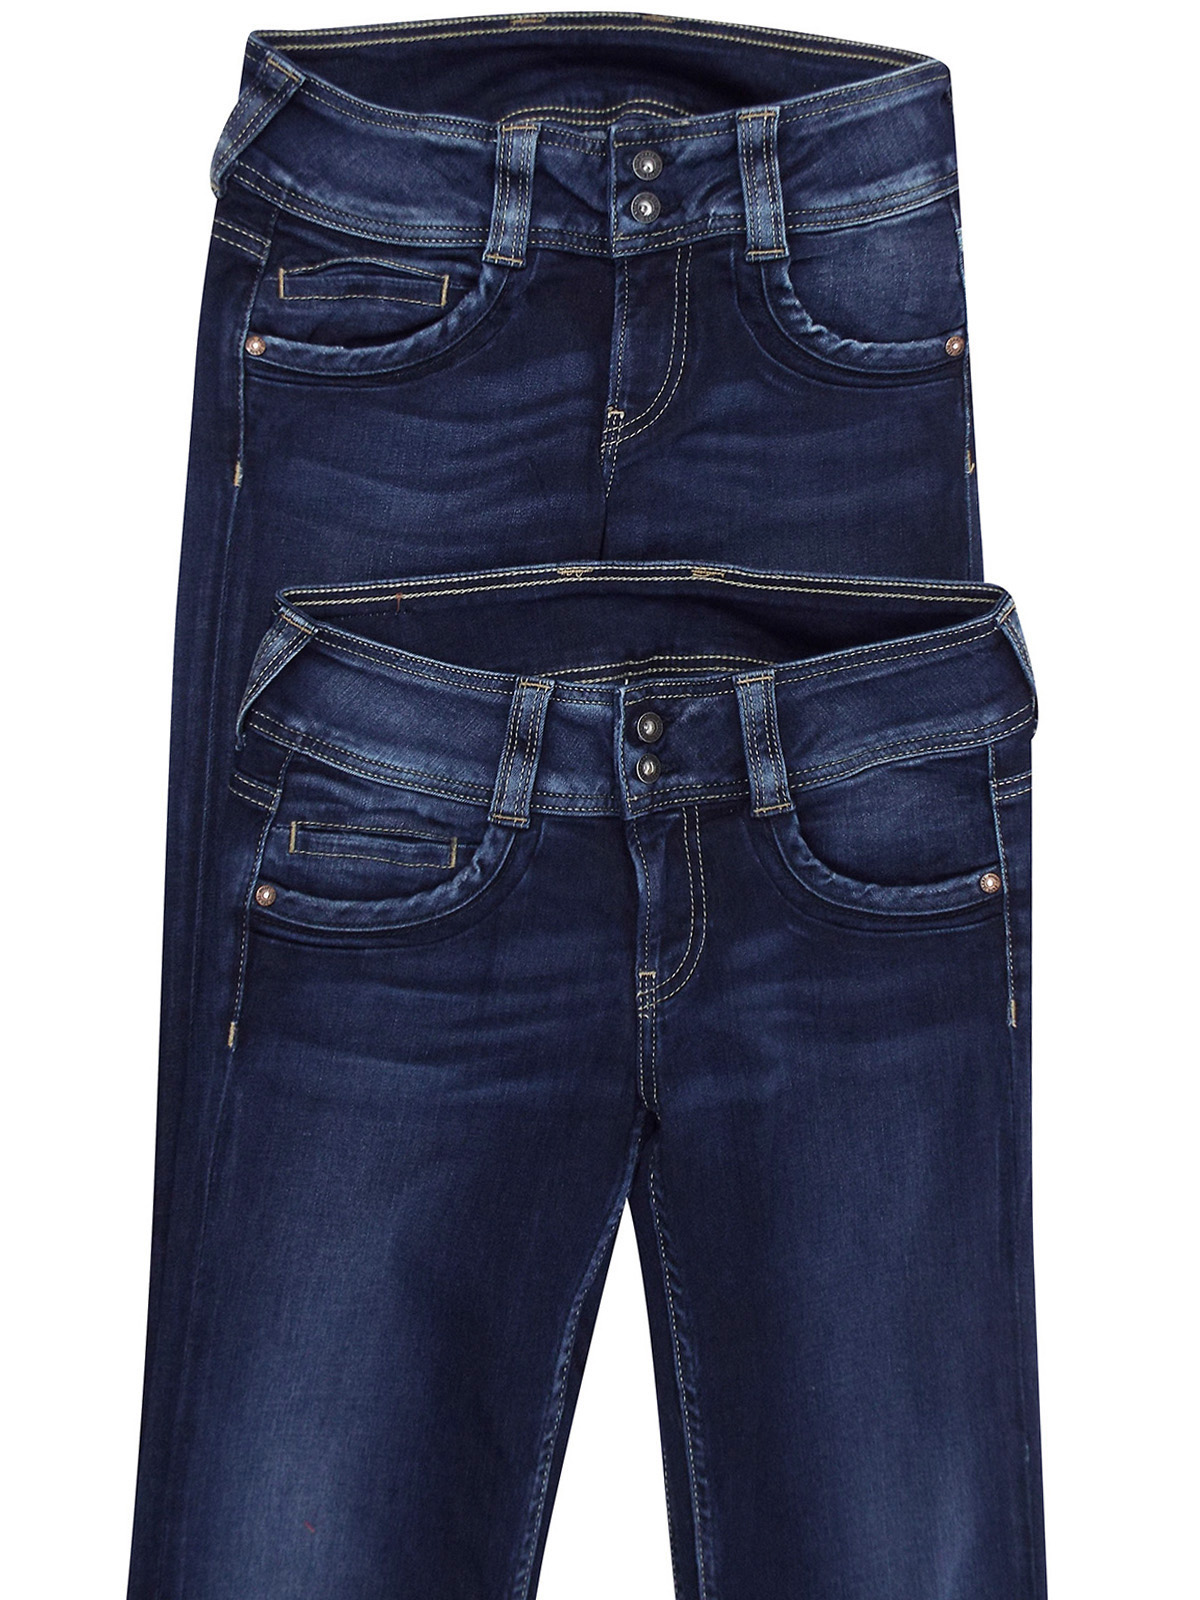 Pepe Jeans - - Pepe Jeans GEN Mixed Pack of Dark DENIM Straight Fit ...